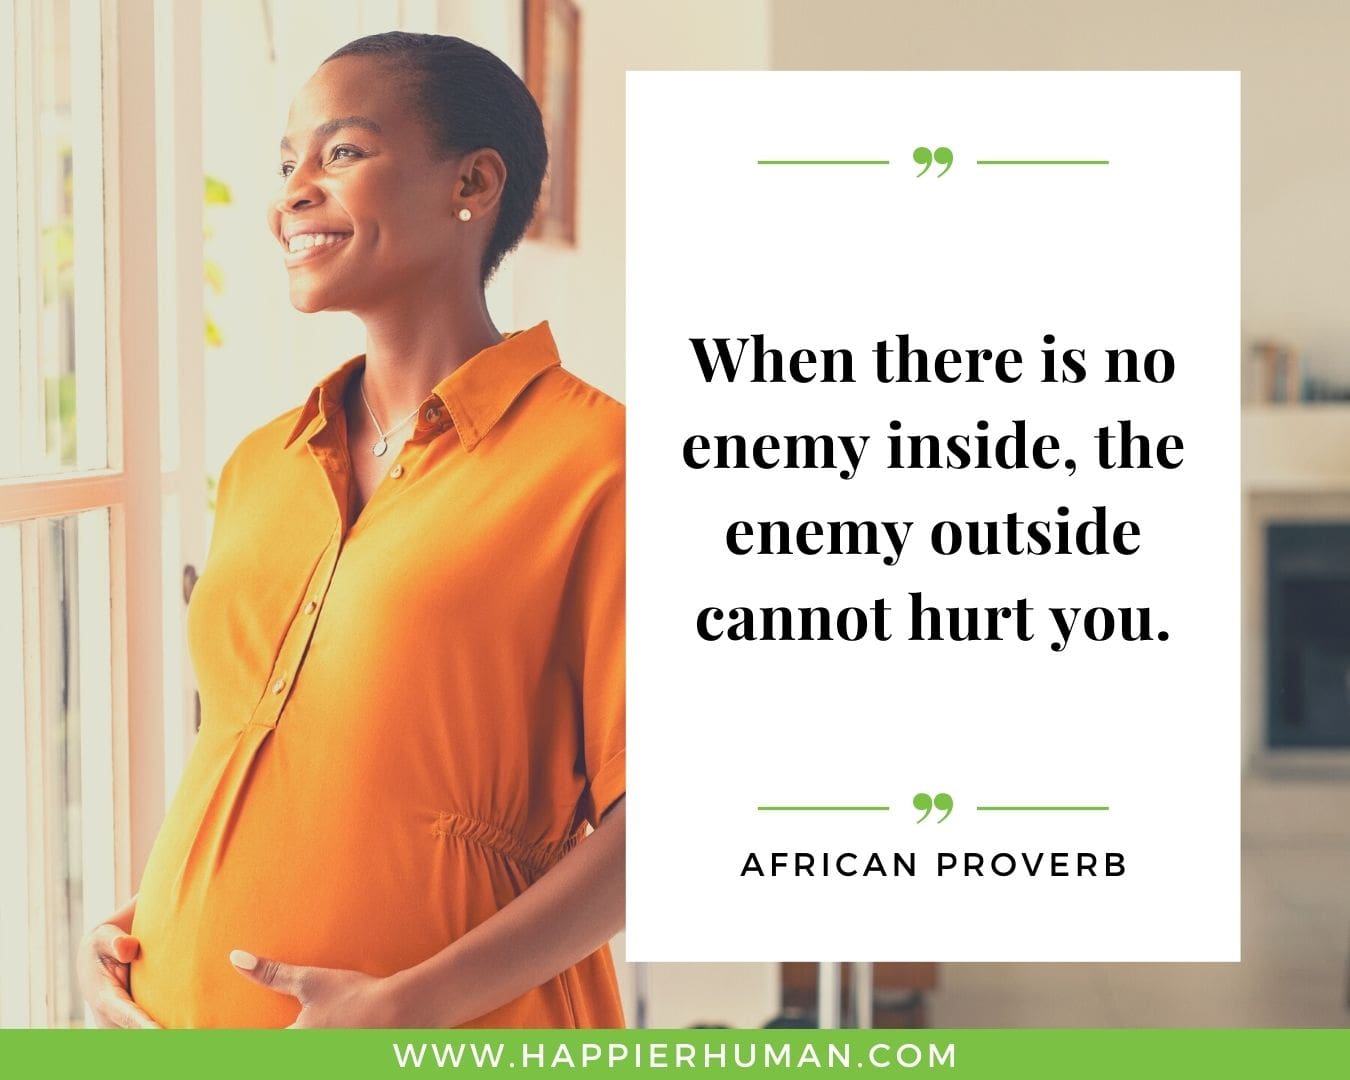 Positive Energy Quotes - “When there is no enemy inside, the enemy outside cannot hurt you.” - African proverb